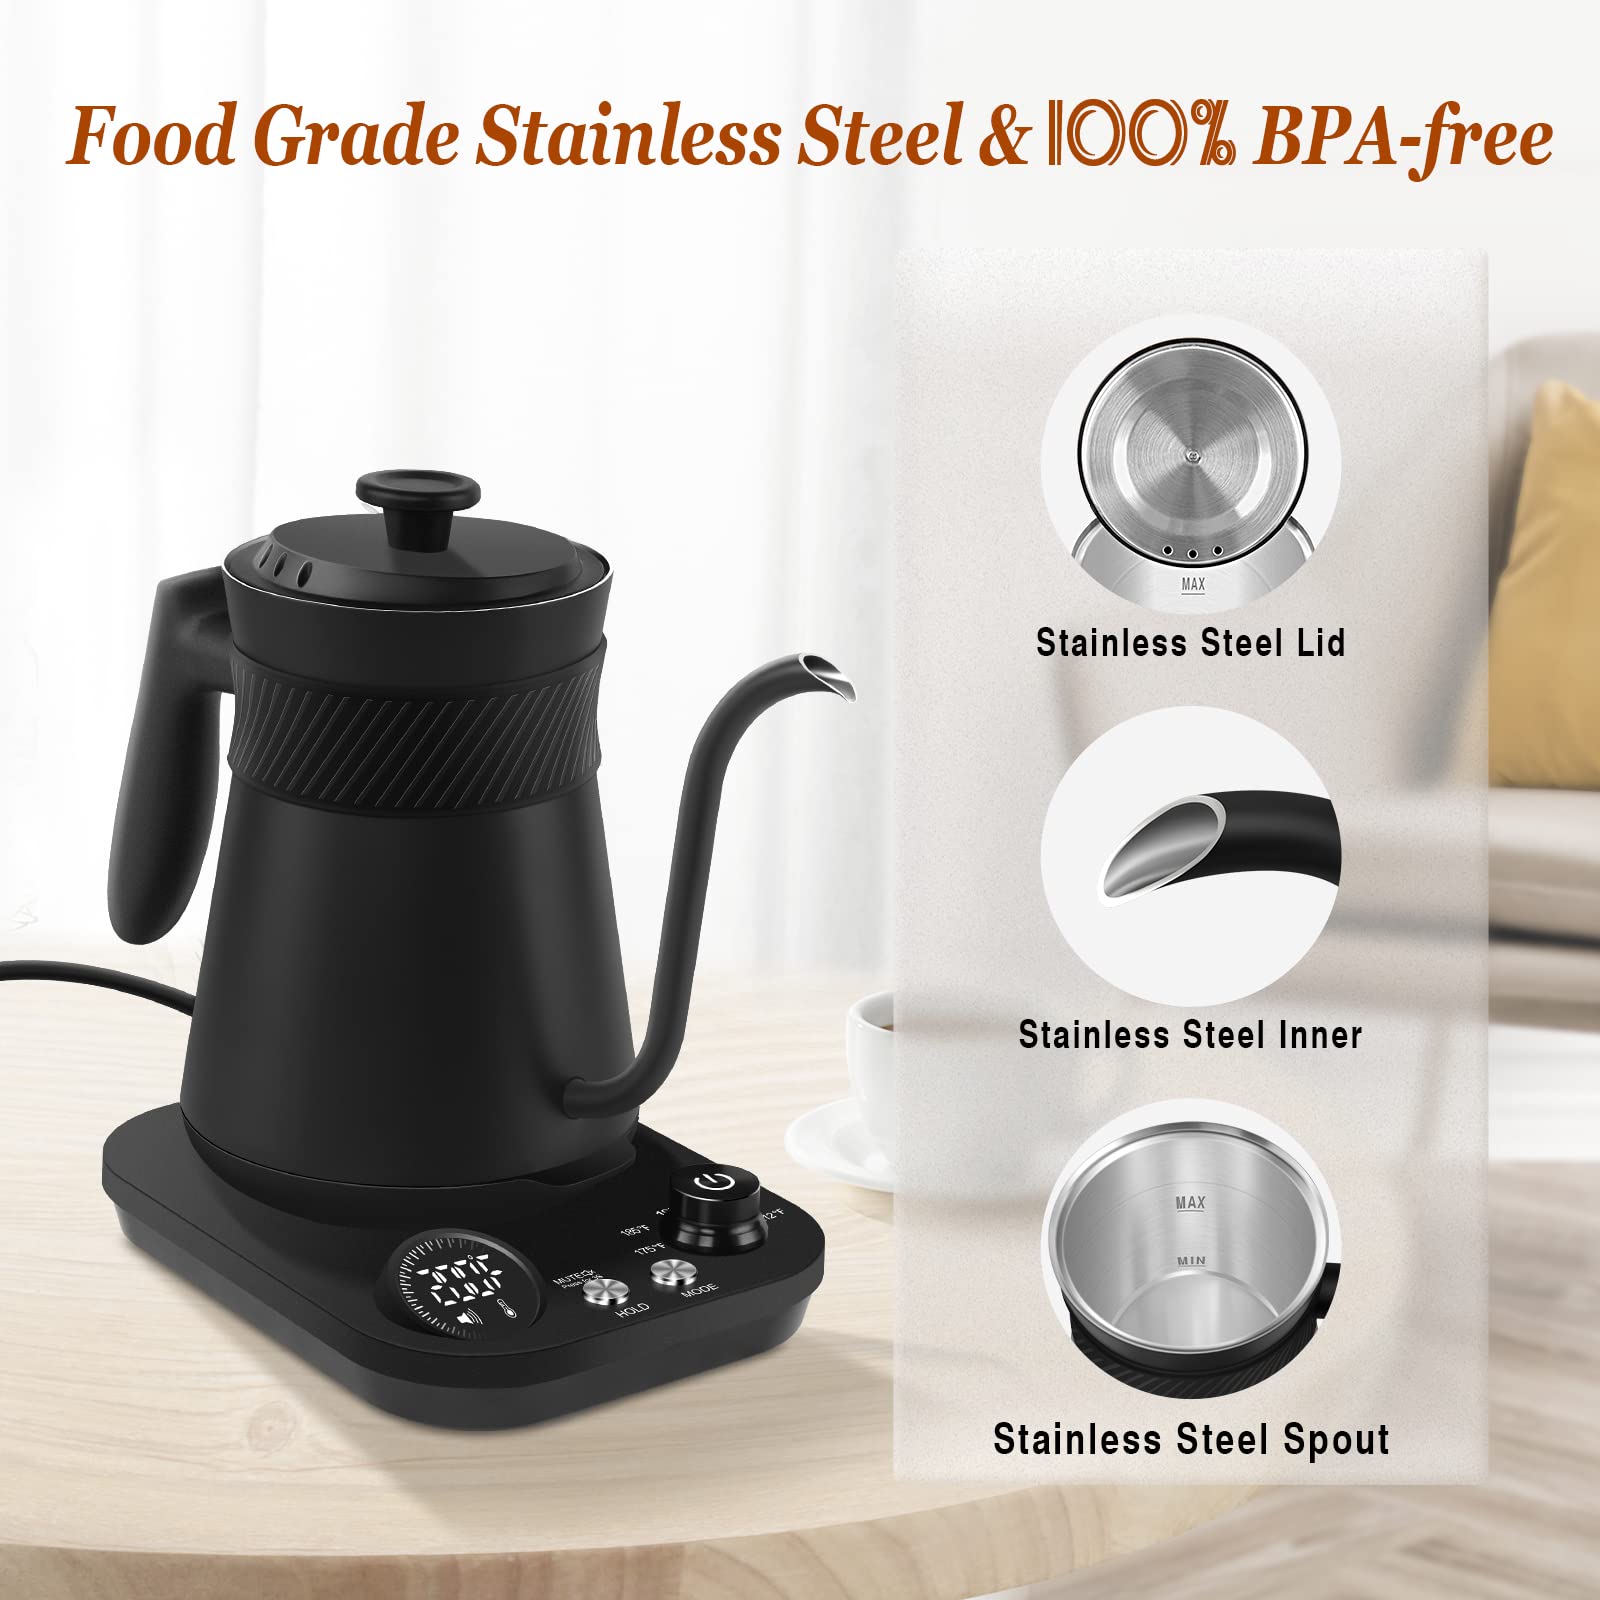 Secura Electric Gooseneck Kettle, Quick Boiling Electric Kettle with 5 Variable Presets for Coffee Tea Brewing, 100% Stainless Steel Inner Tea/Coffee Kettle with 1.5H Keep Warm,1200W-0.8L, Matt Black